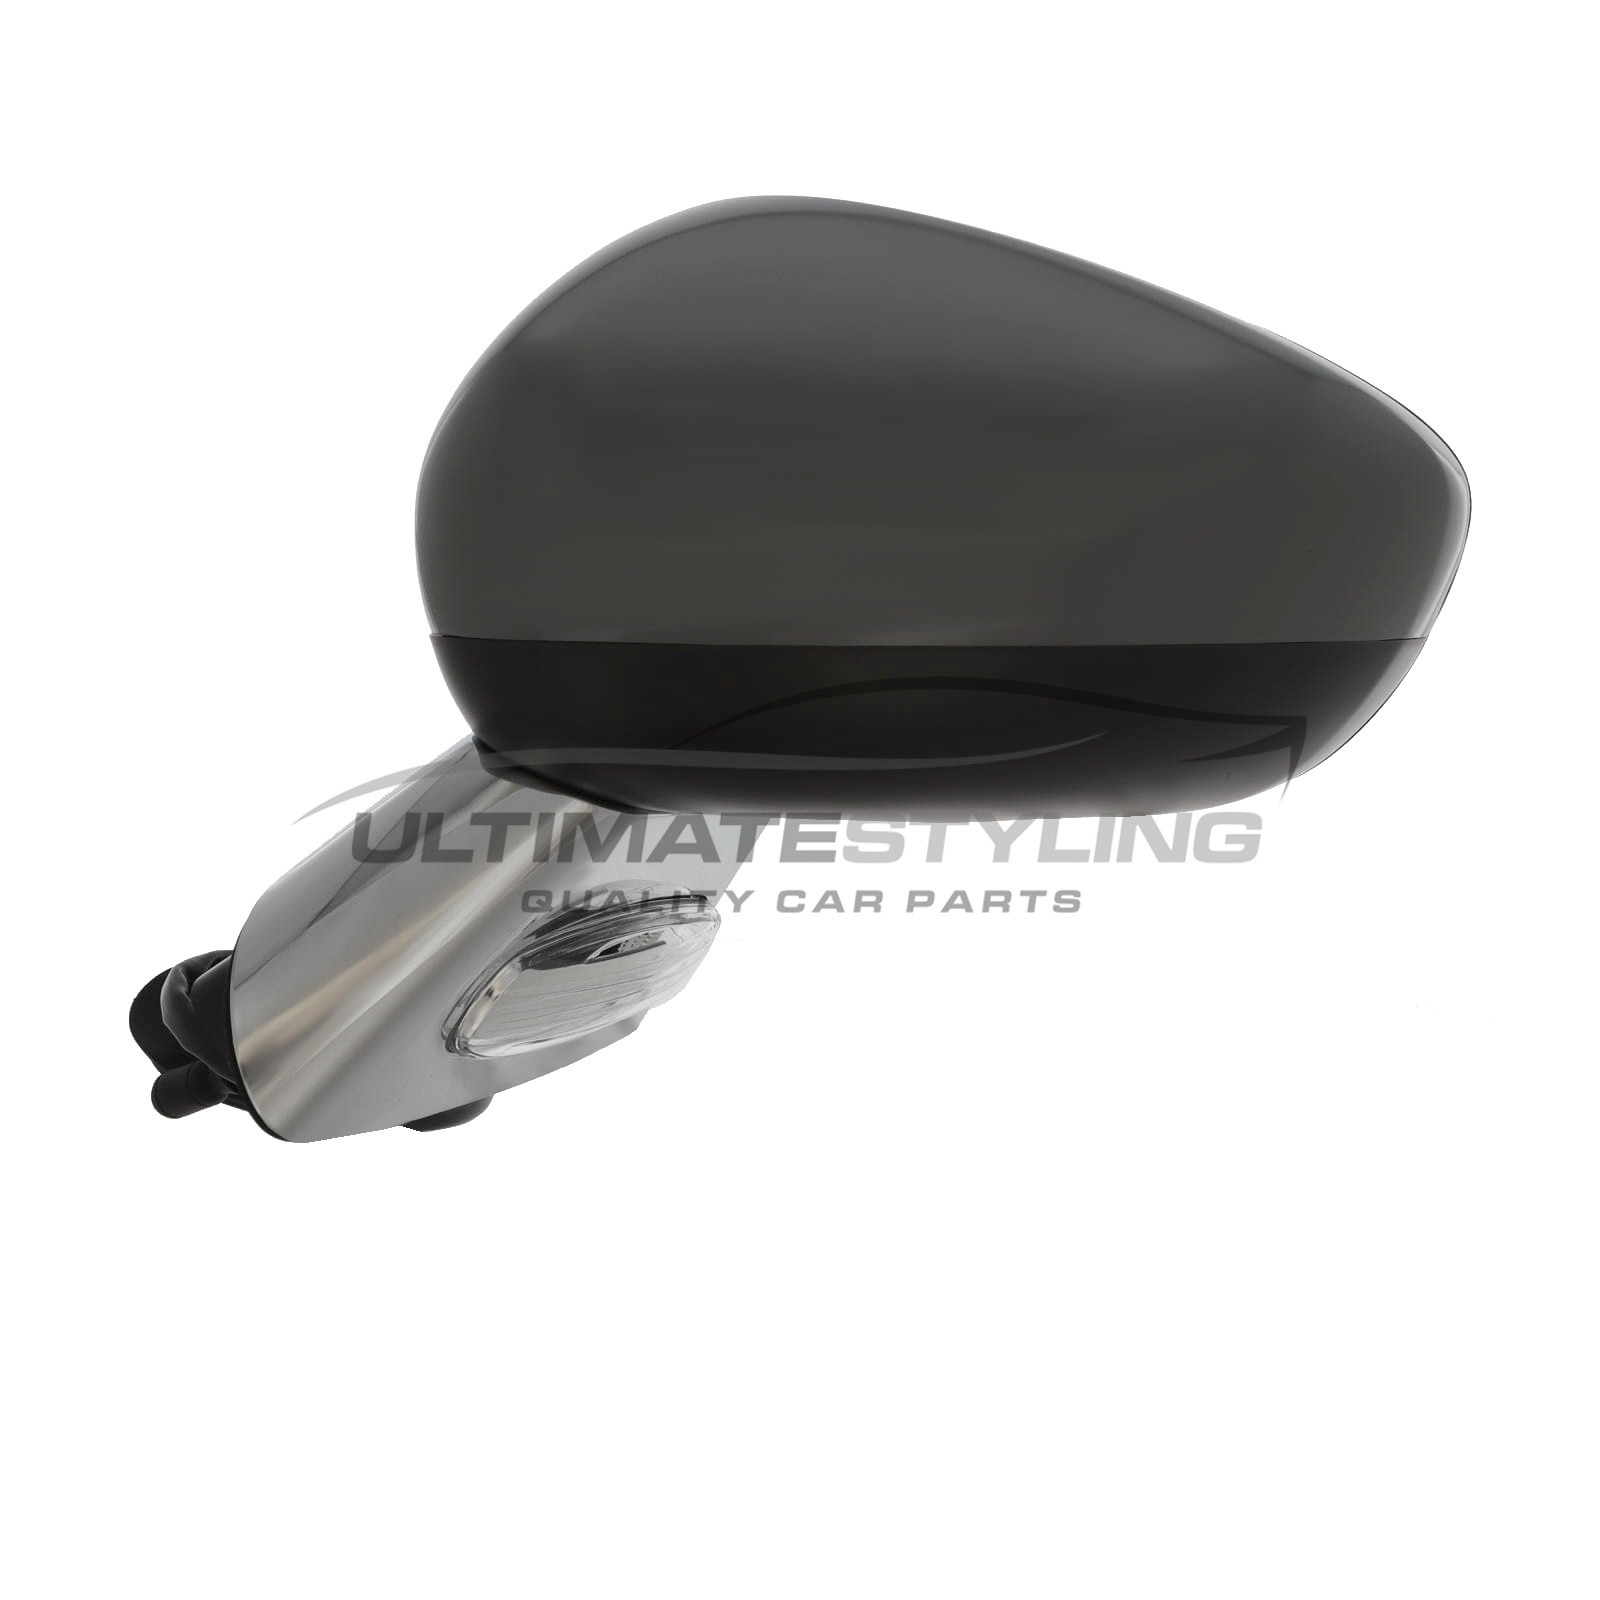 Citroen C3 Wing Mirror / Door Mirror - Passenger Side (LH) - Electric adjustment - Heated Glass - Power Folding - Chrome Arm & Primed Cover